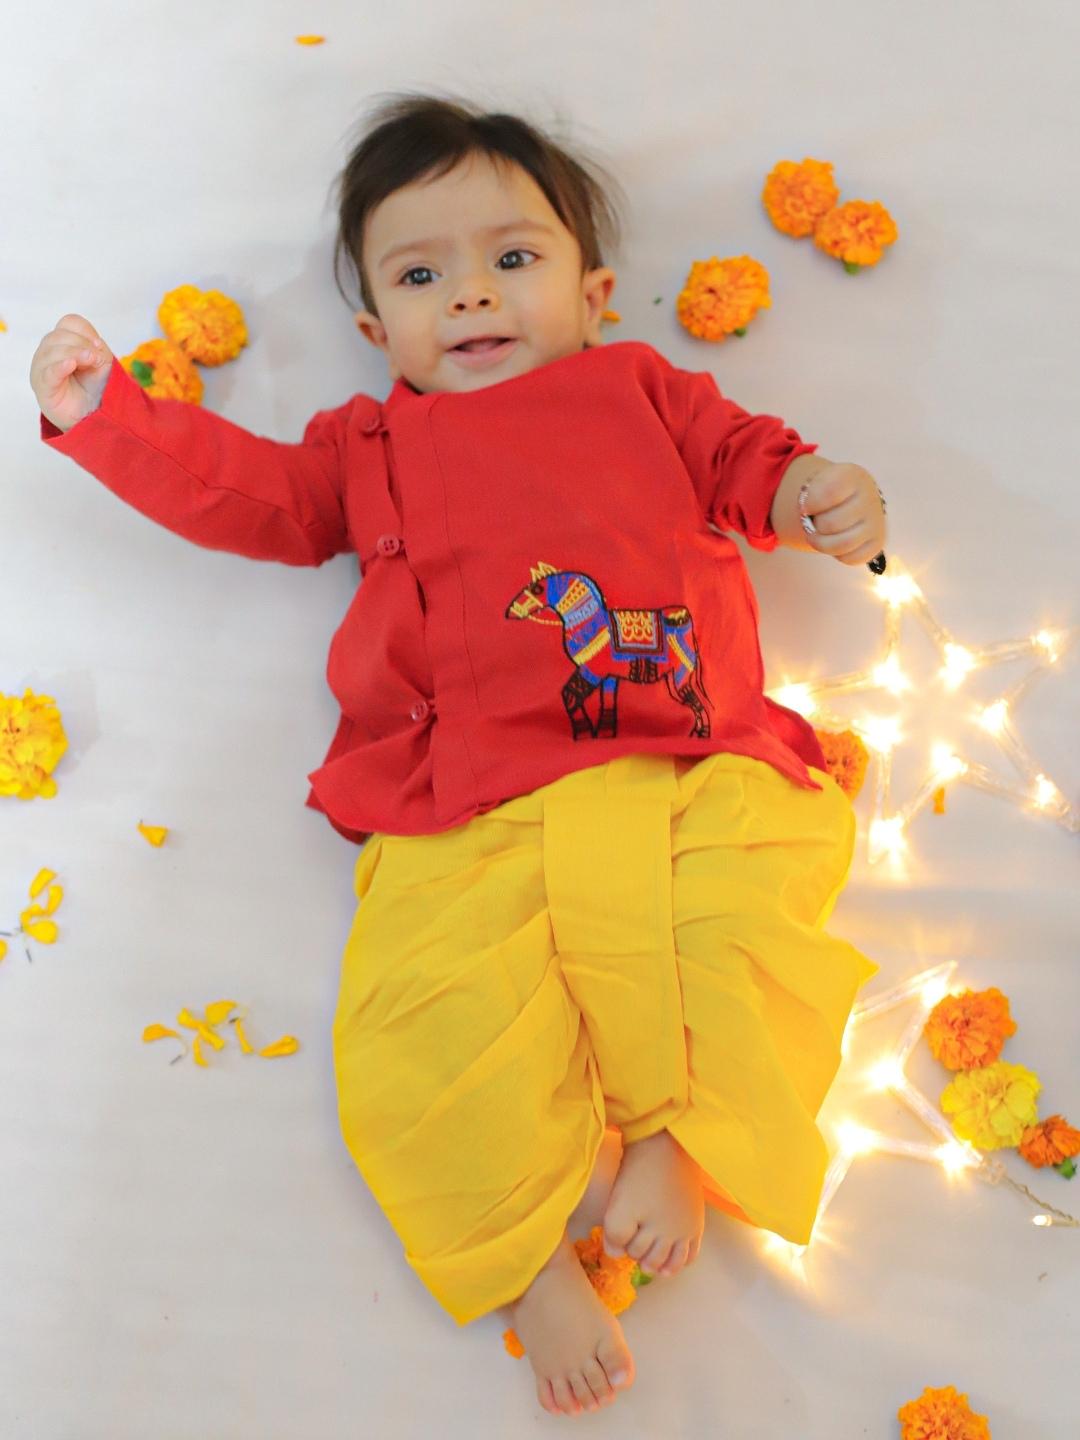 Celebrate your baby boy's first Diwali in style with our adorable and  festive Diwali outfits. Shop now and dress your little one in tradi... |  Instagram